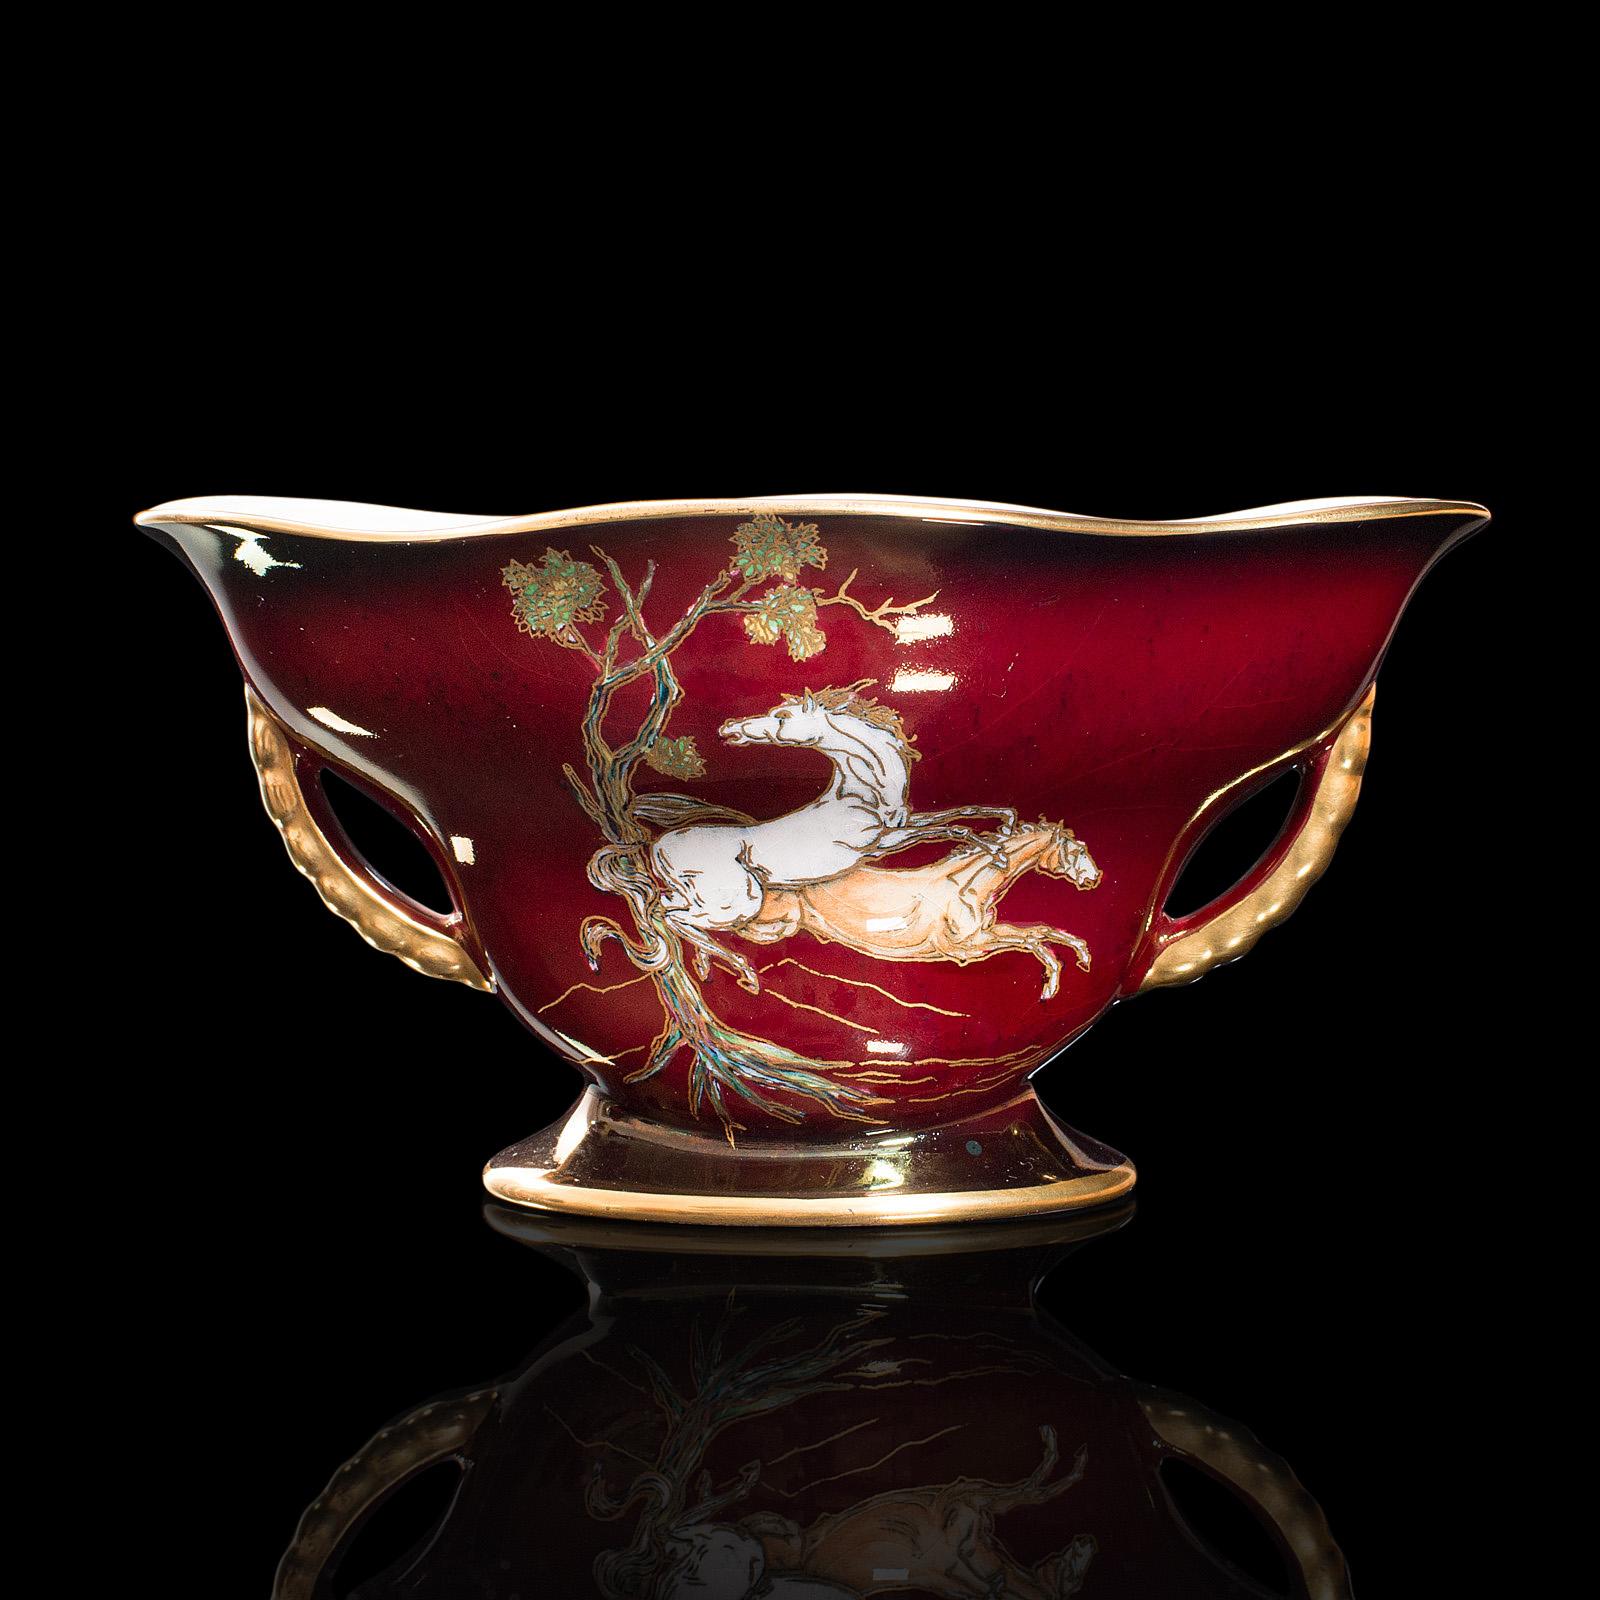 This is a vintage decorative grape dish. An English, ceramic ornamental fruit bowl with lustre finish, dating to the mid 20th century, circa 1950.

Deep red hues and fascinating decoration
Displays a desirable aged patina - presented in very good